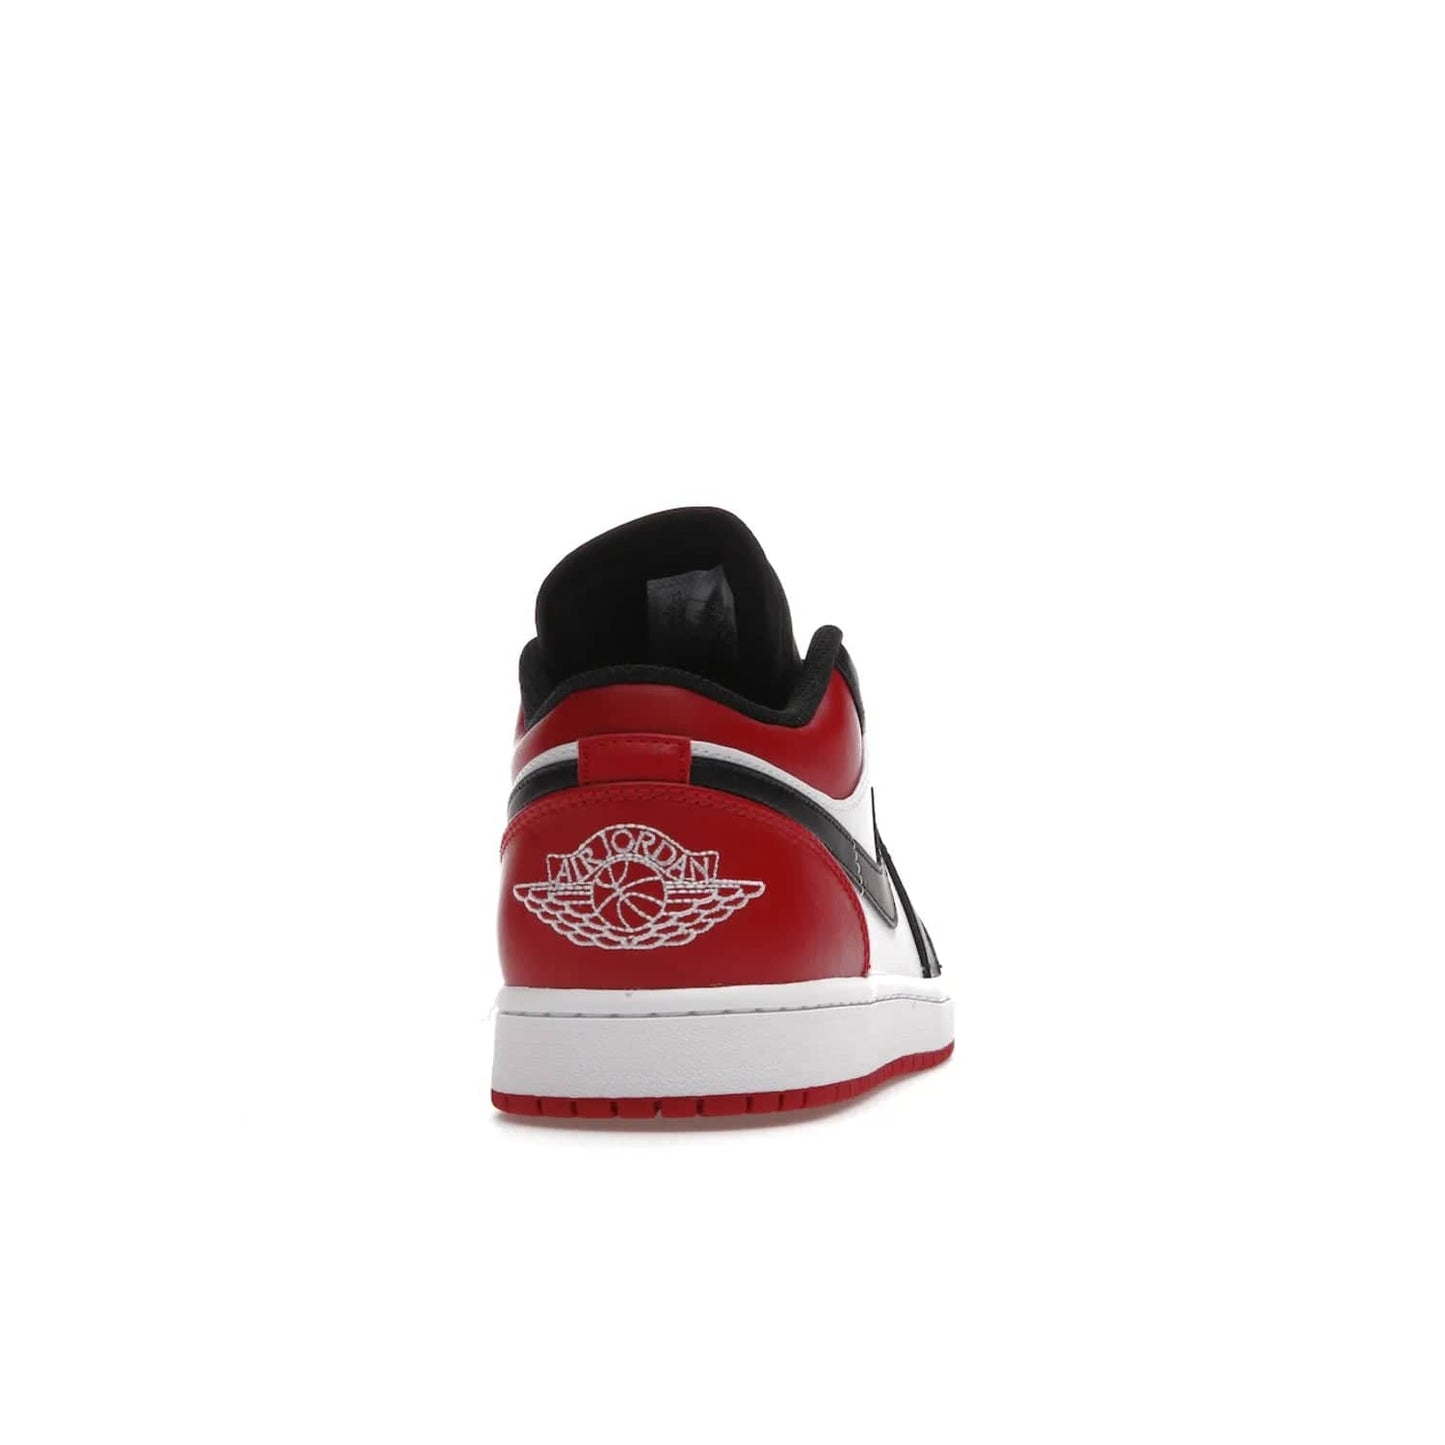 Jordan 1 Low Bred Toe - Image 29 - Only at www.BallersClubKickz.com - Step into the iconic Jordan 1 Retro. Mixing and matching of leather in red, black, and white makes for a unique colorway. Finished off with a Wing logo embroidery & Jumpman label. Comfortable and stylish at an affordable $100, the Jordan 1 Low Bred Toe is perfect for any true sneaker fan.